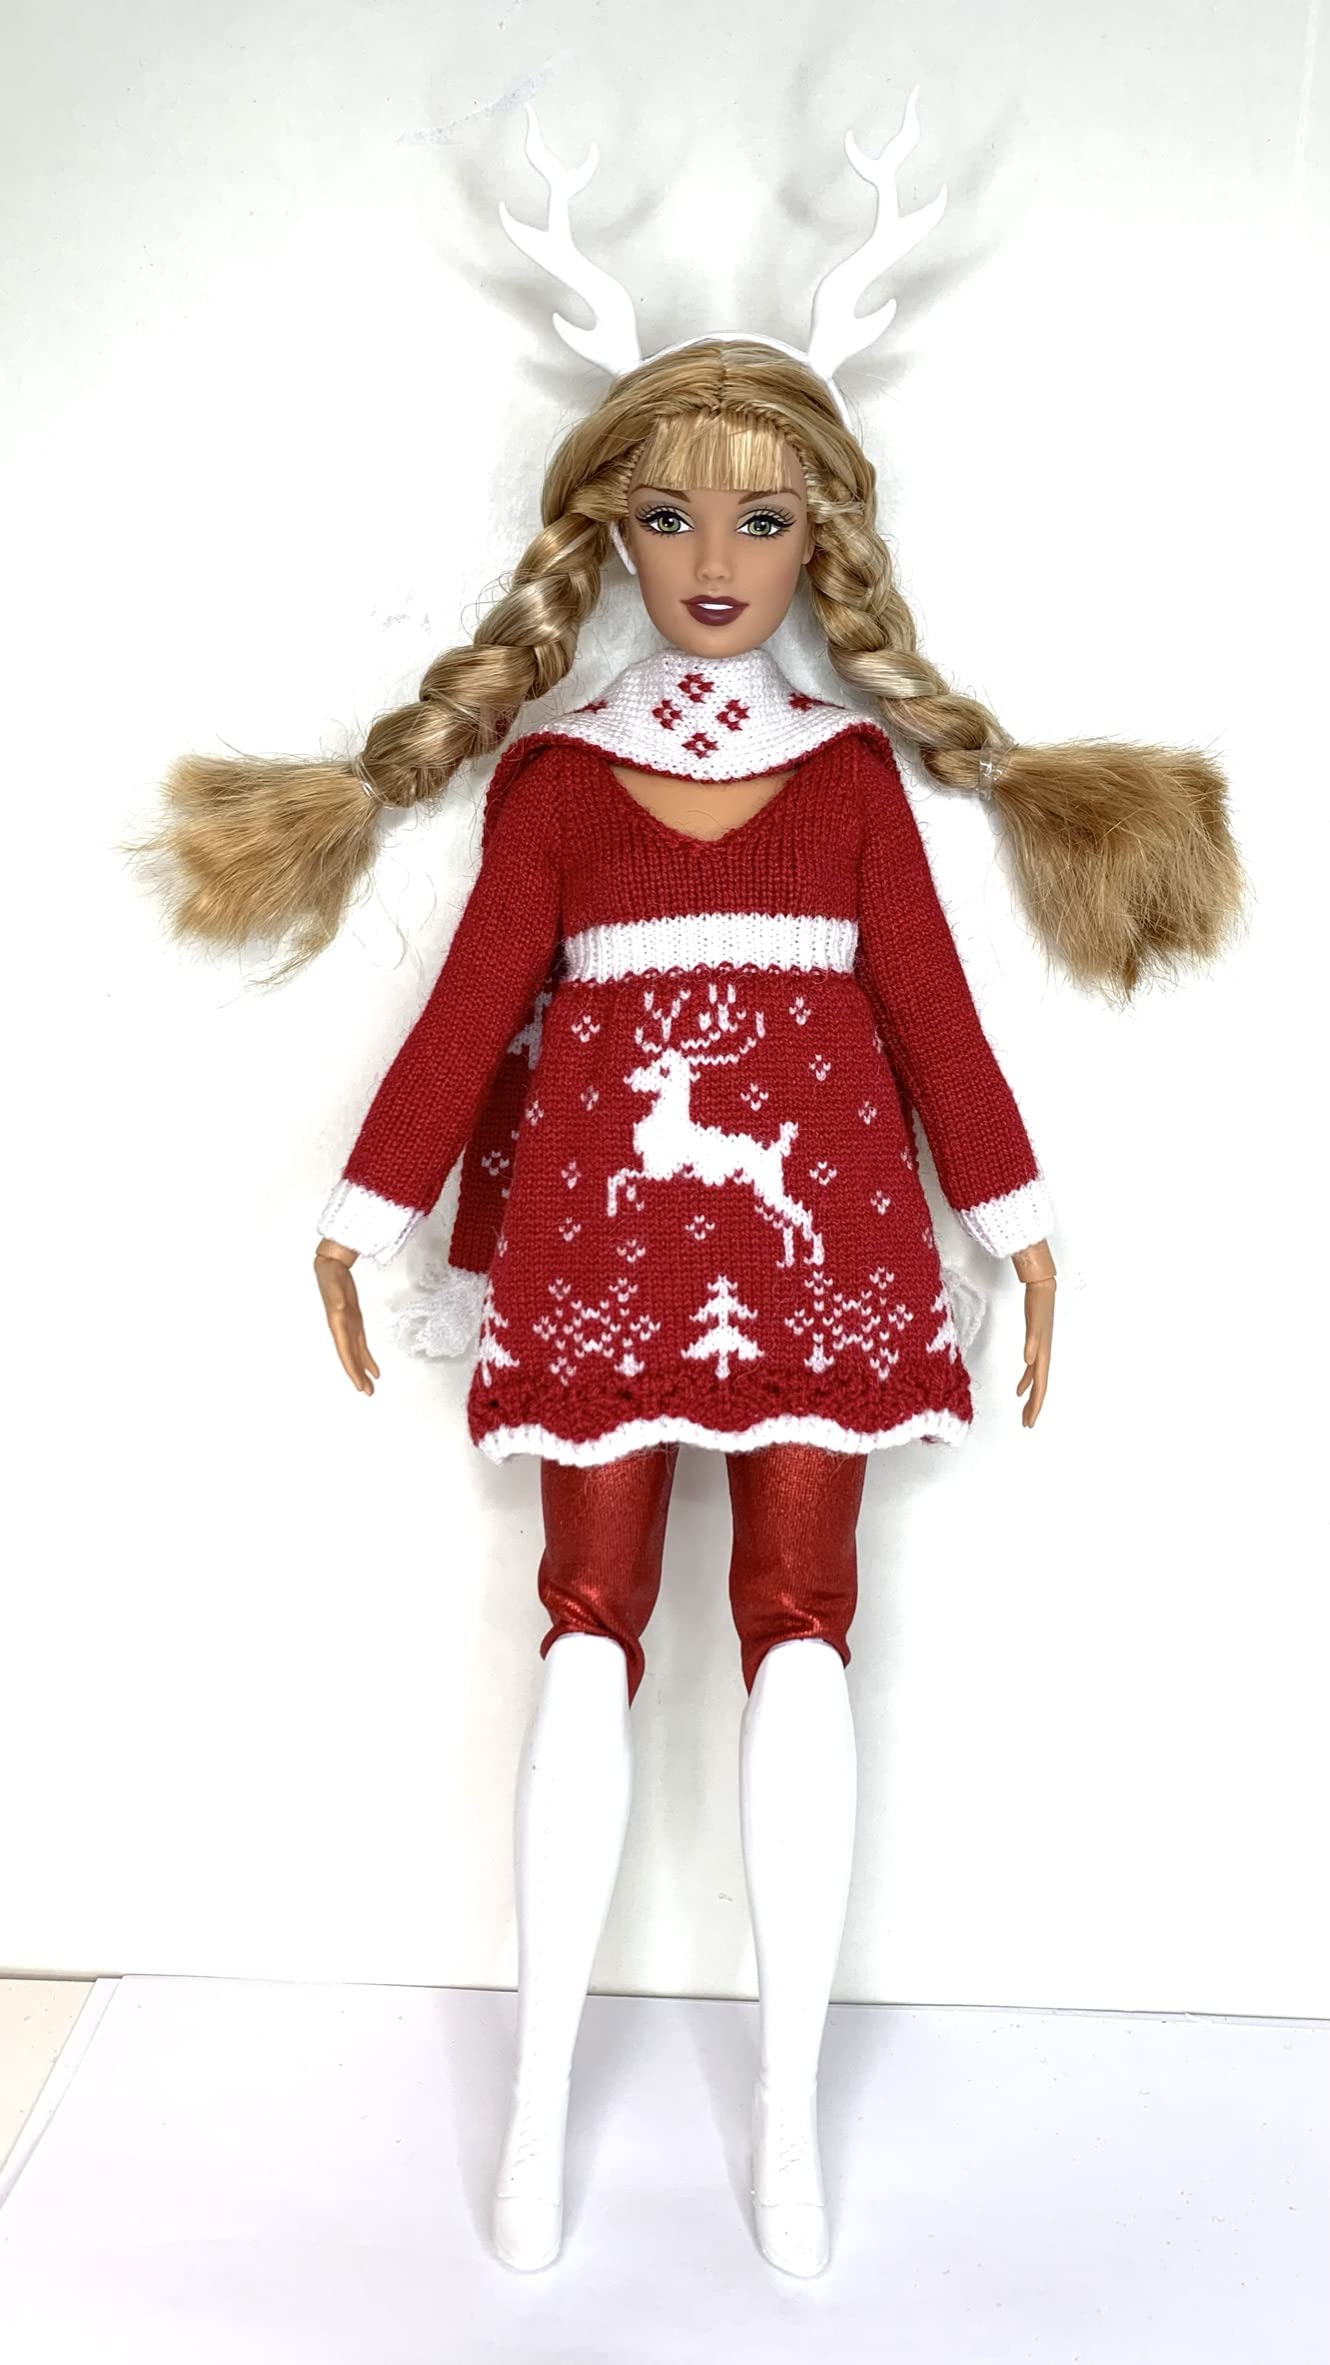 Eledoll 11.5 inch Doll Clothes Lot Deluxe Fashion Pack Holiday Christmas Miss Santa Knitted Deer Outfit with White Boots